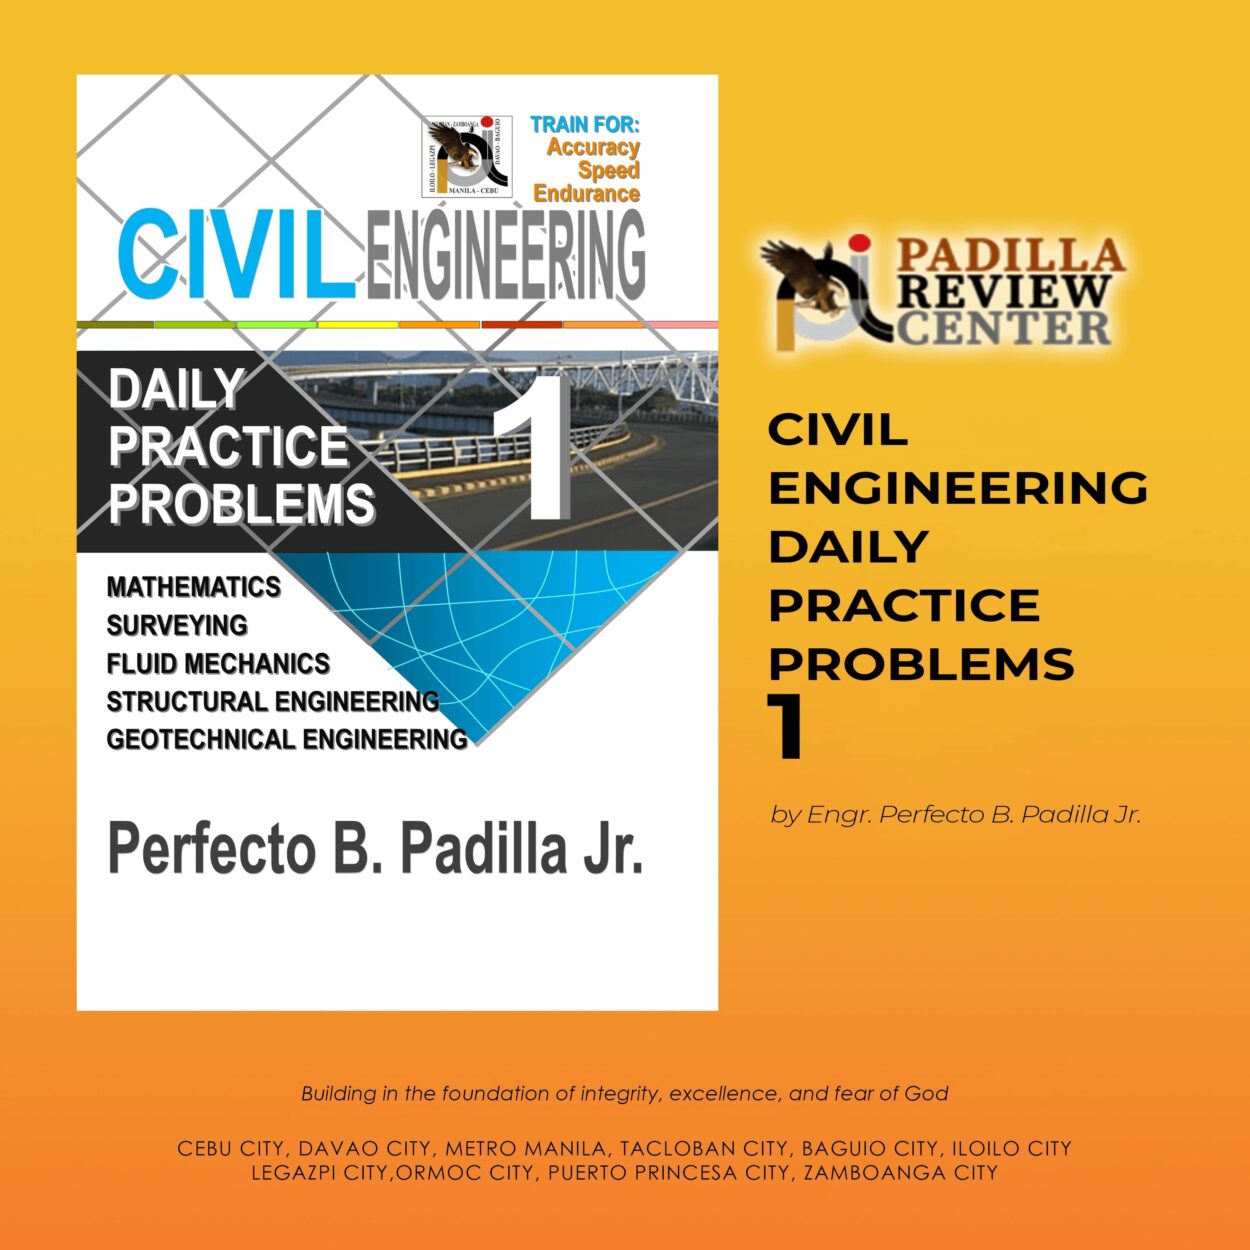 Civil Engineering Daily Practice Problems